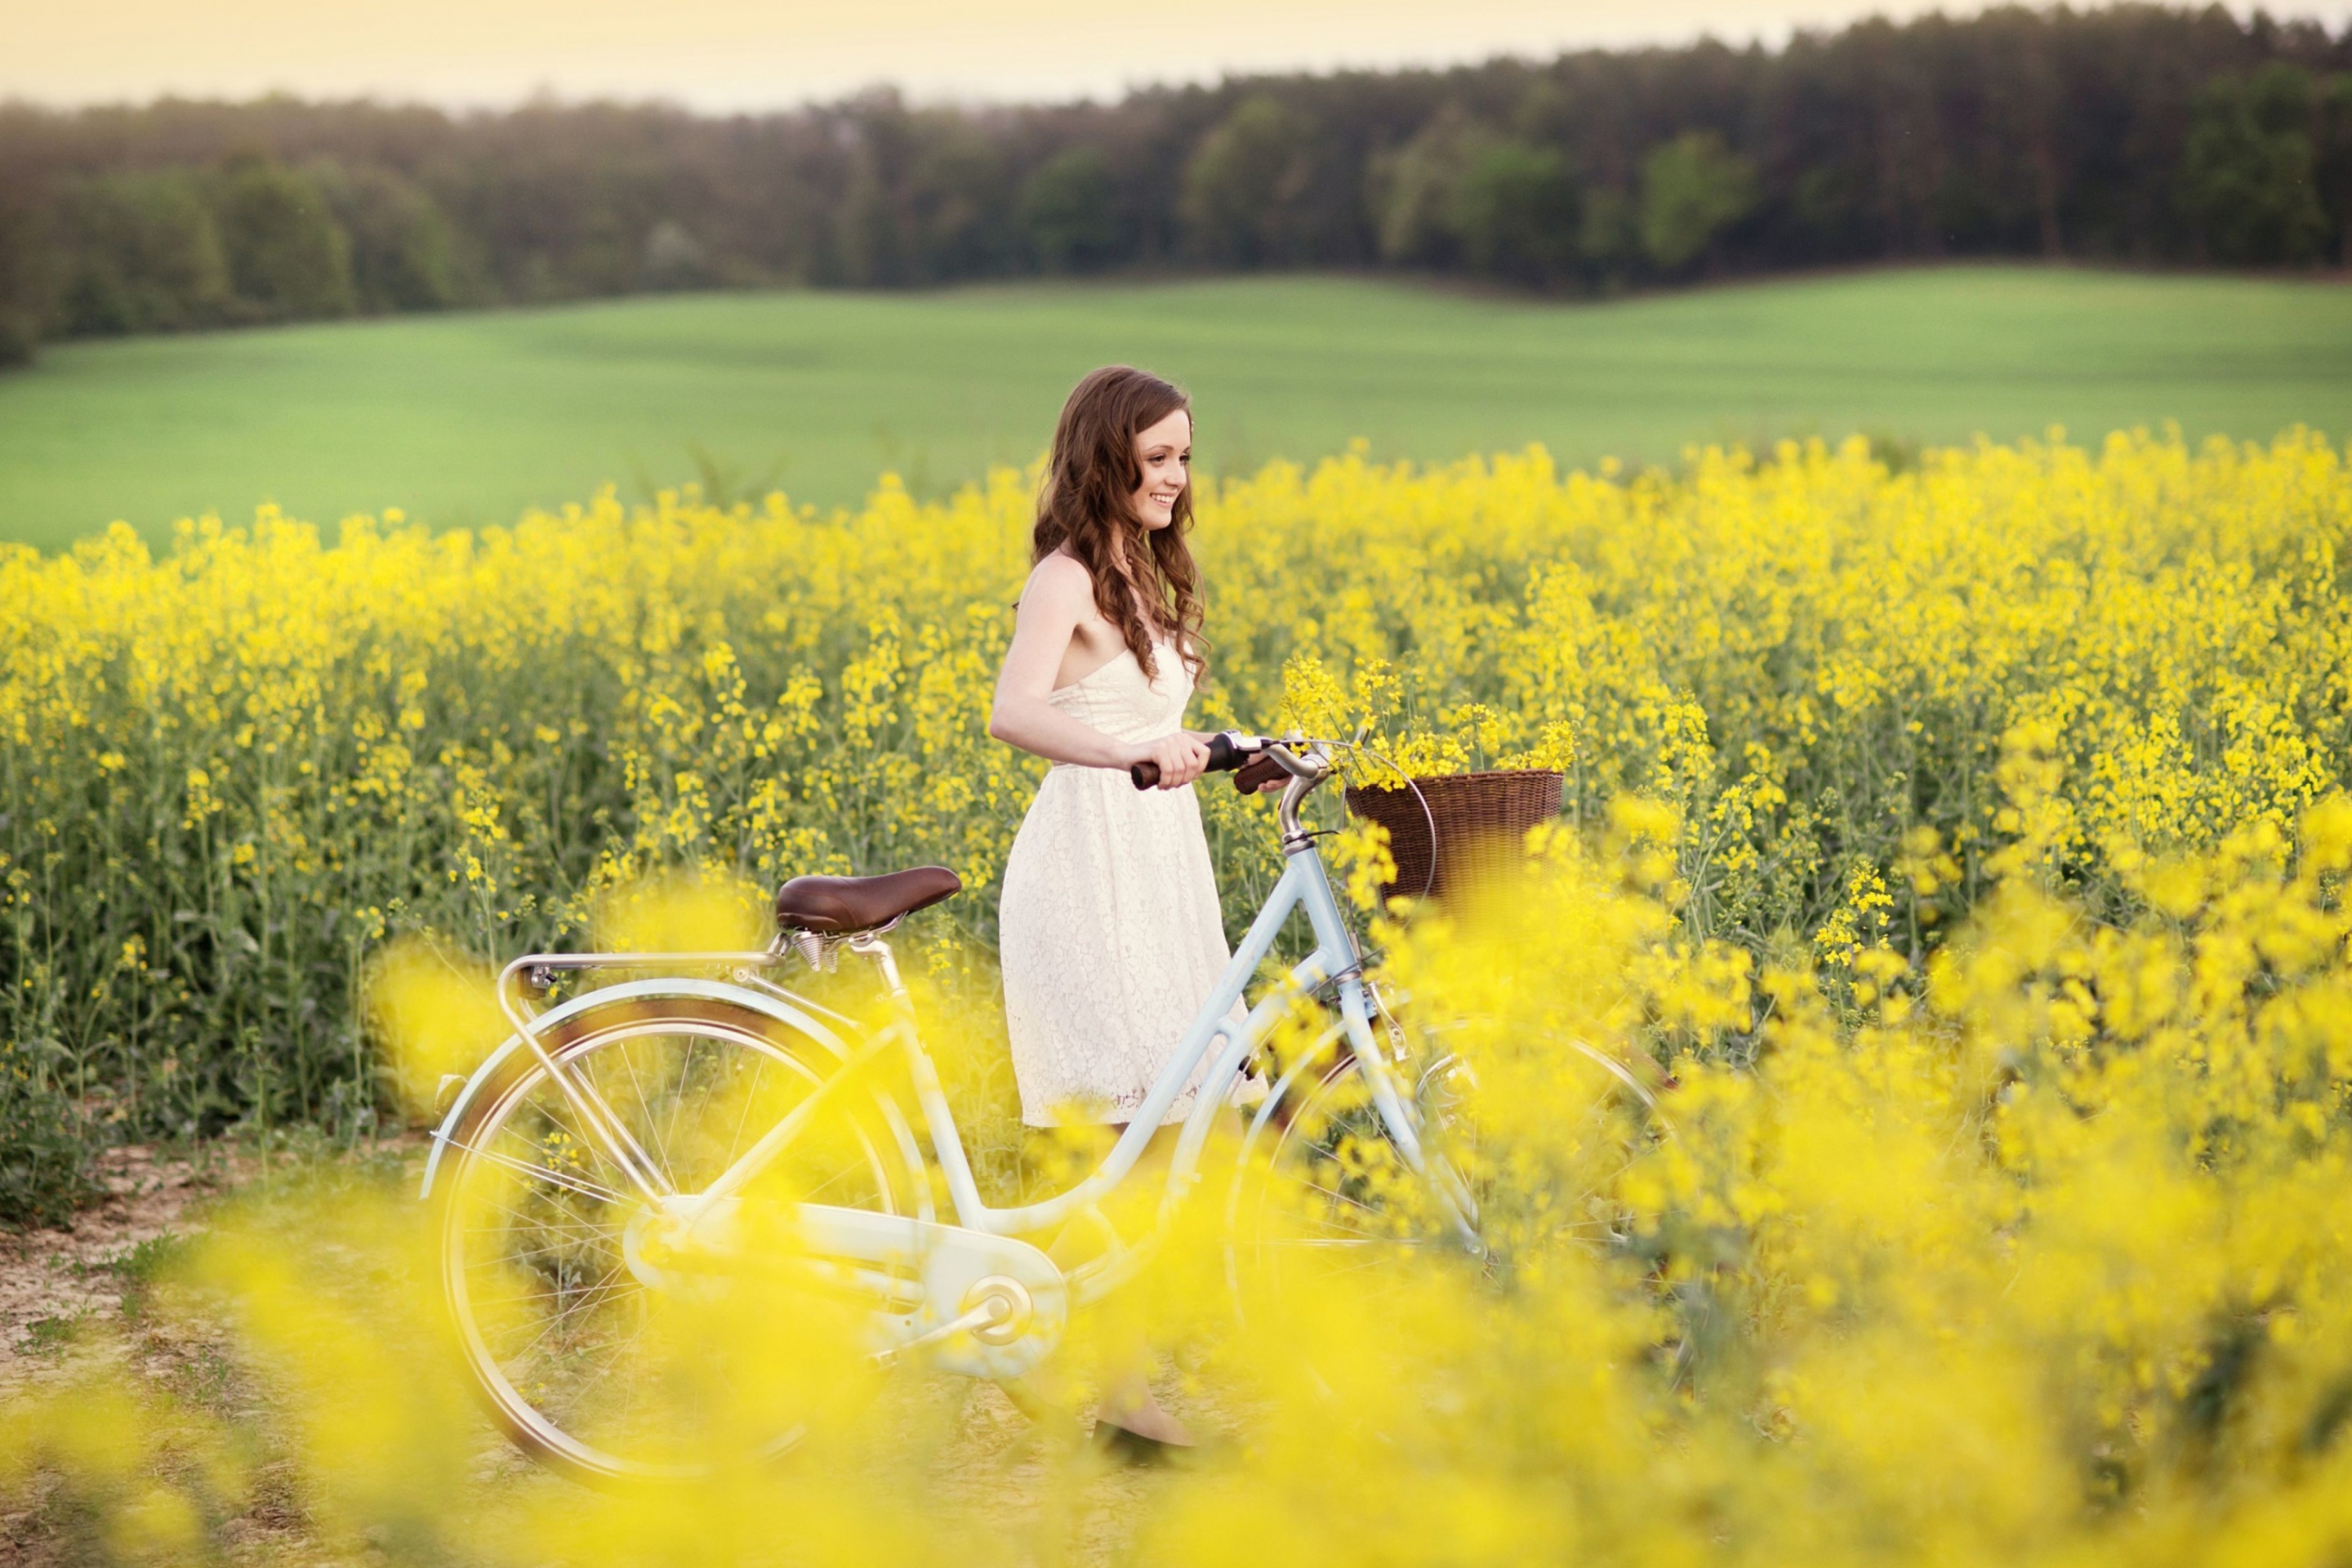 Girl With Bicycle In Yellow Field wallpaper 2880x1920